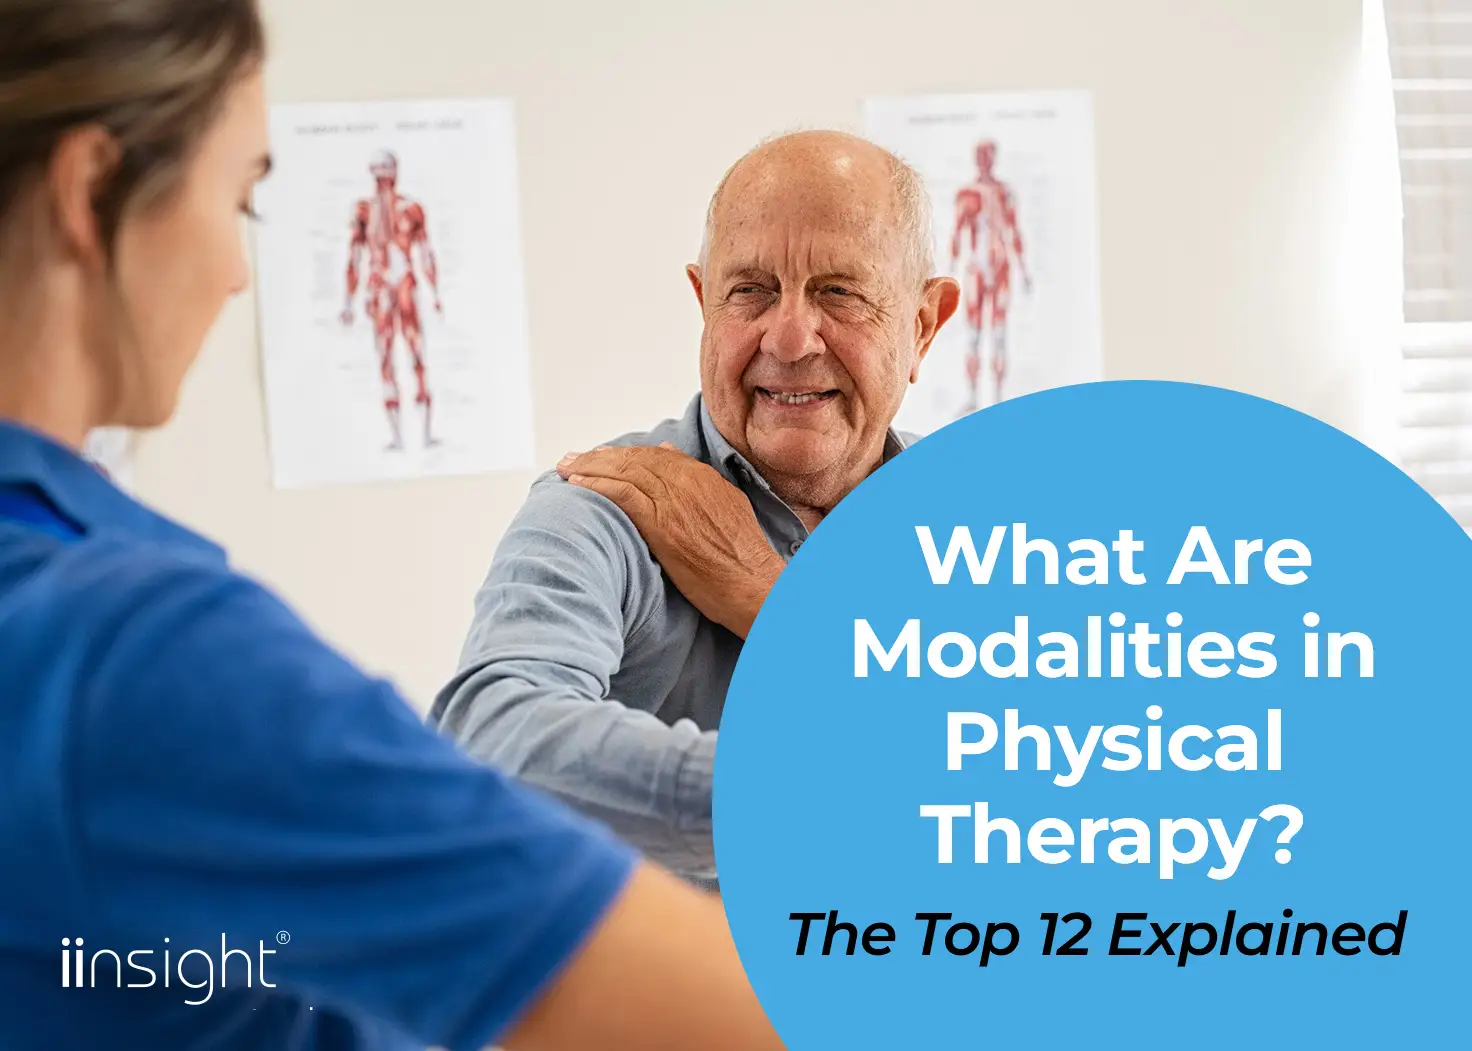 What Are Modalities in Physical Therapy?